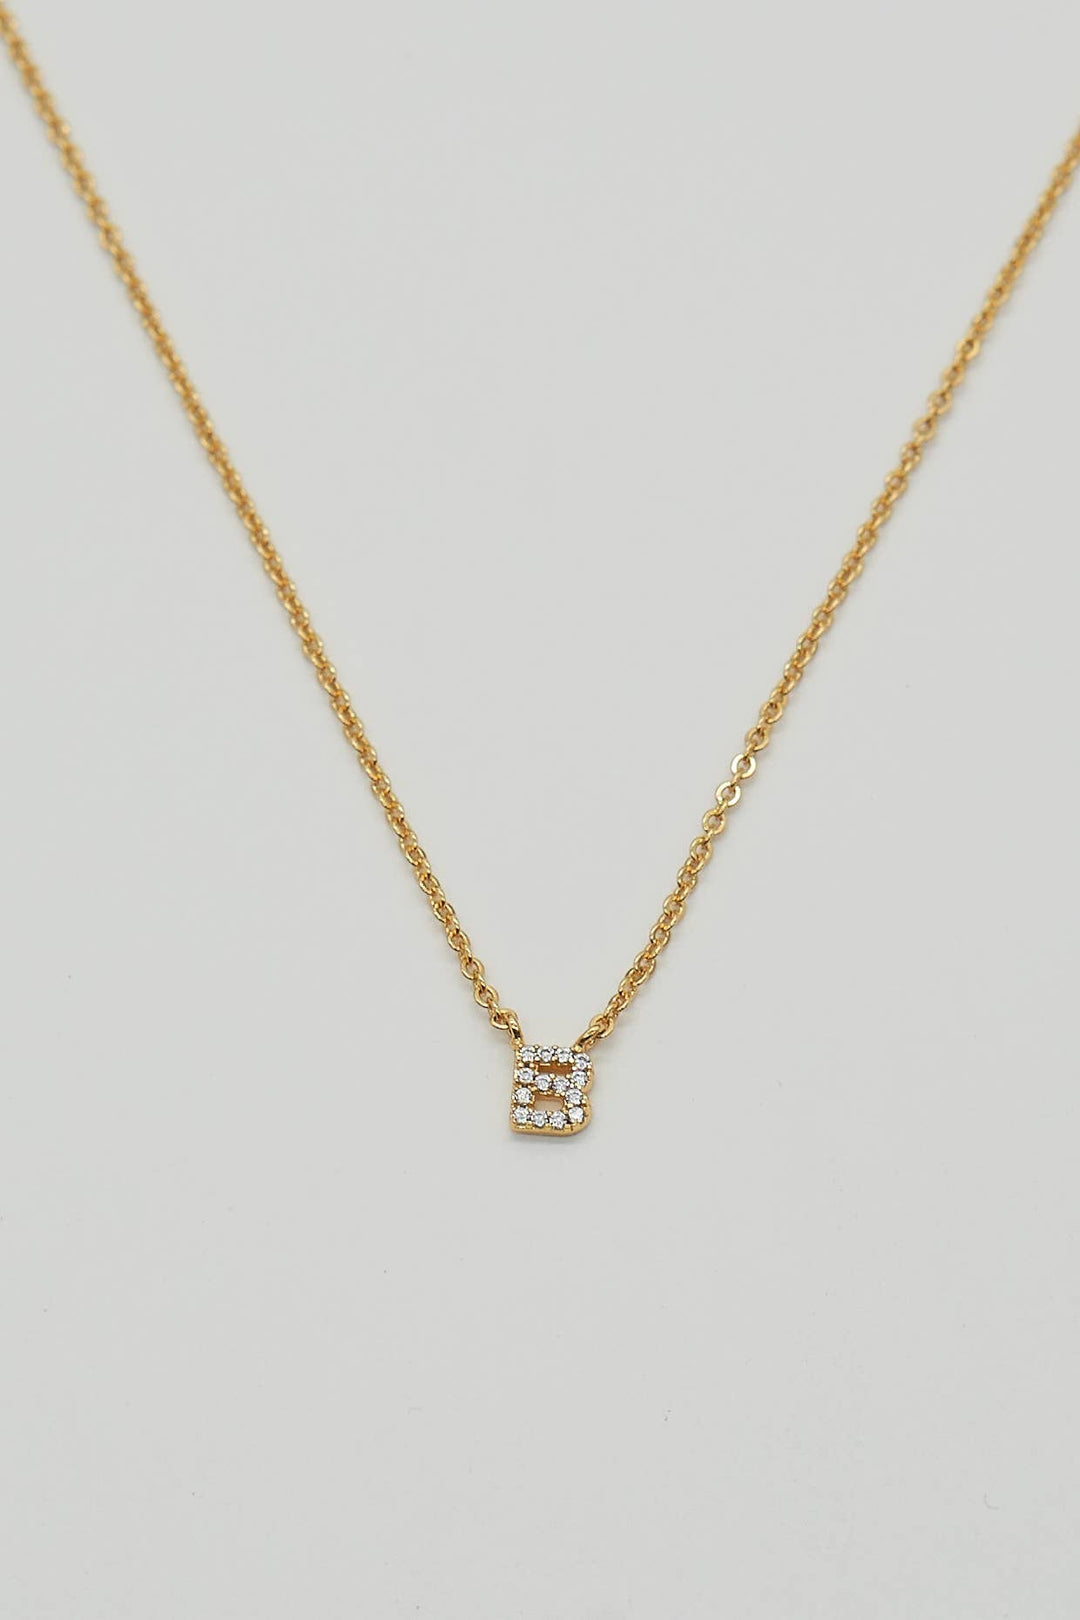 Shiny Initial Necklace: Holiday Favorite!: R